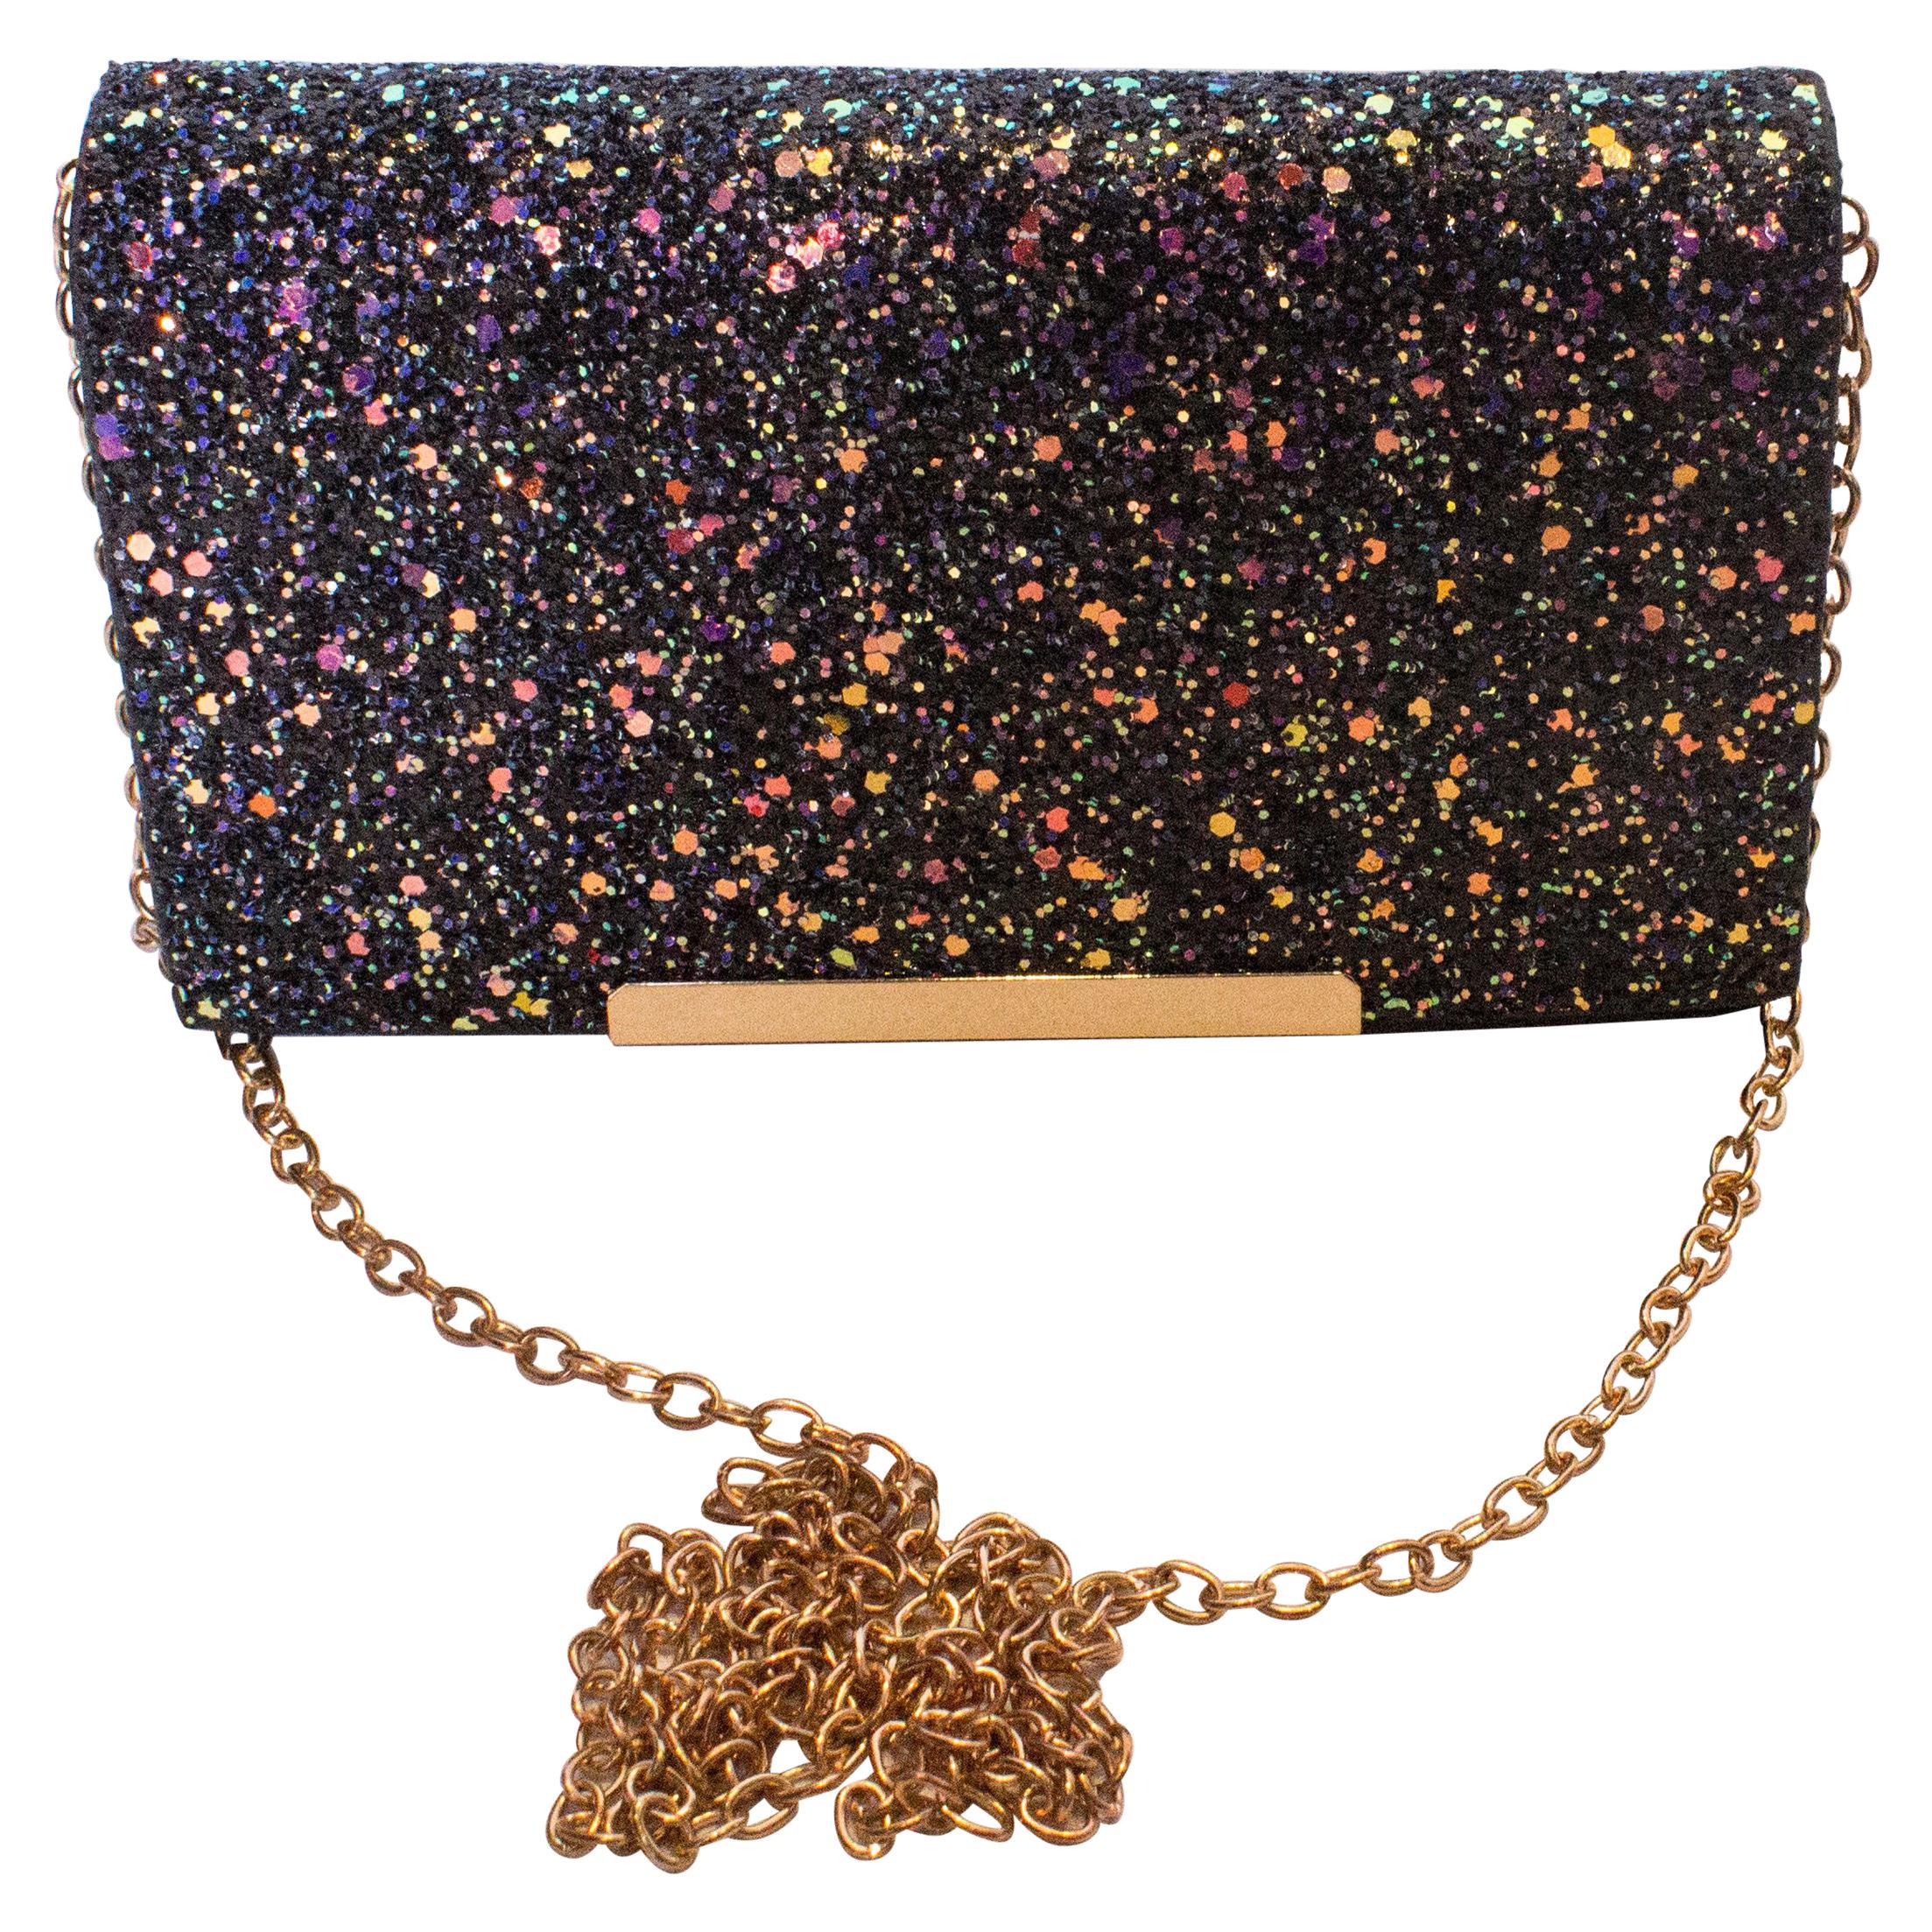 Vintage Party Sparkly Bag